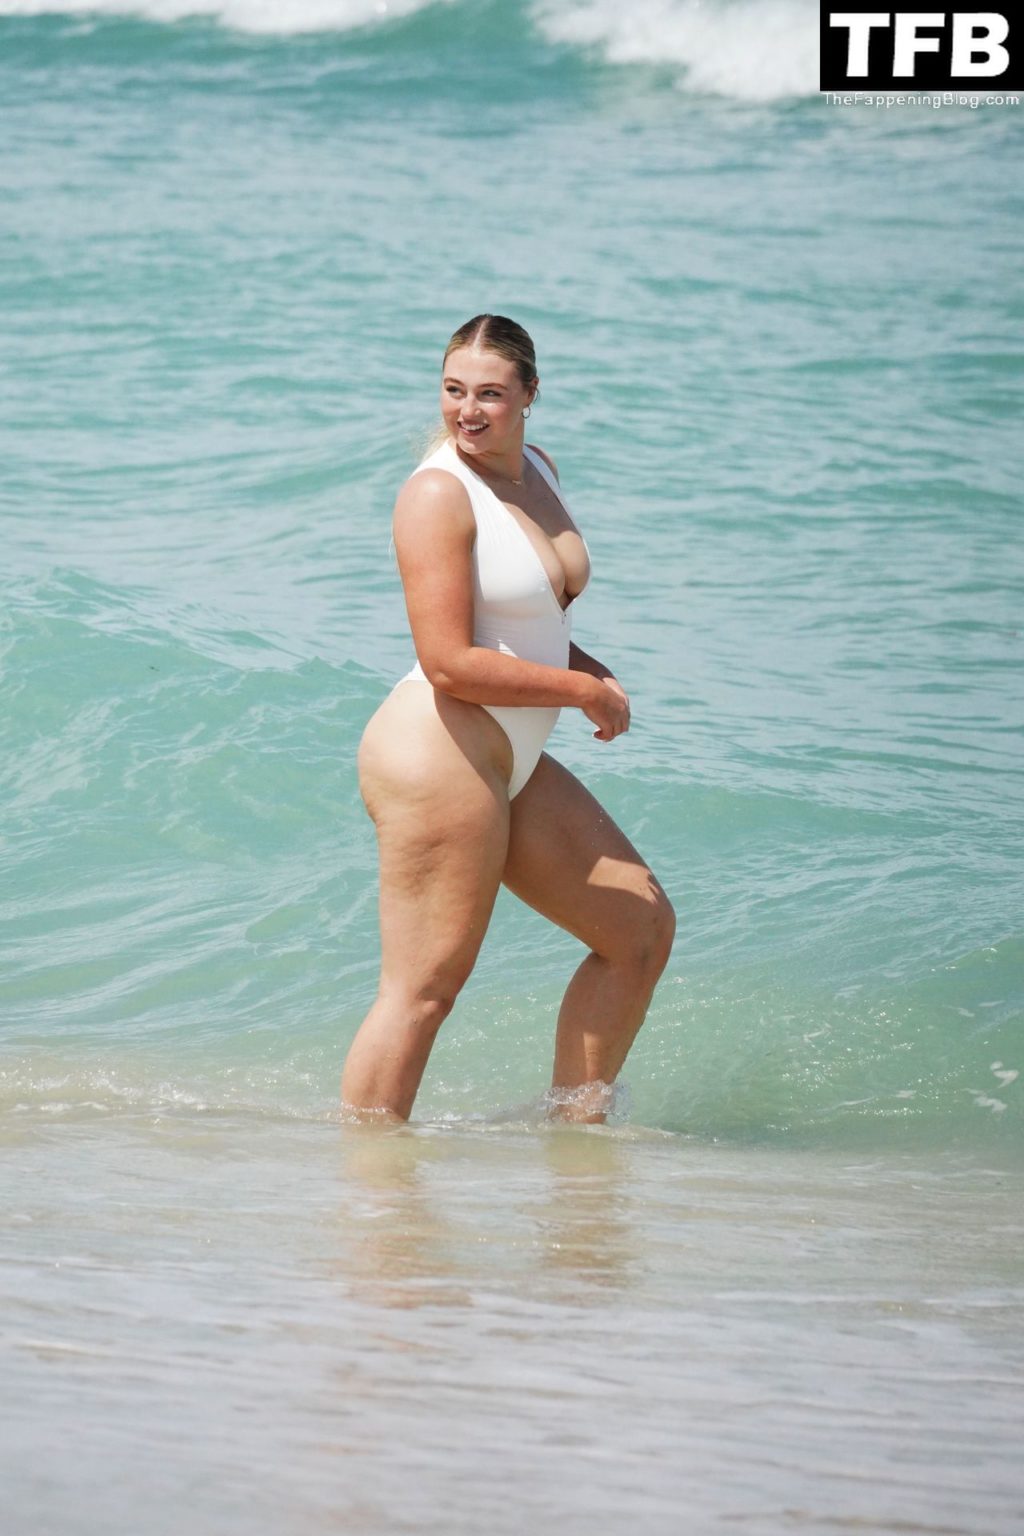 Iskra Lawrence Sexy The Fappening Blog 8 1024x1536 - Iskra Lawrence Displays Her Curves on the Beach in Miami (21 Photos)